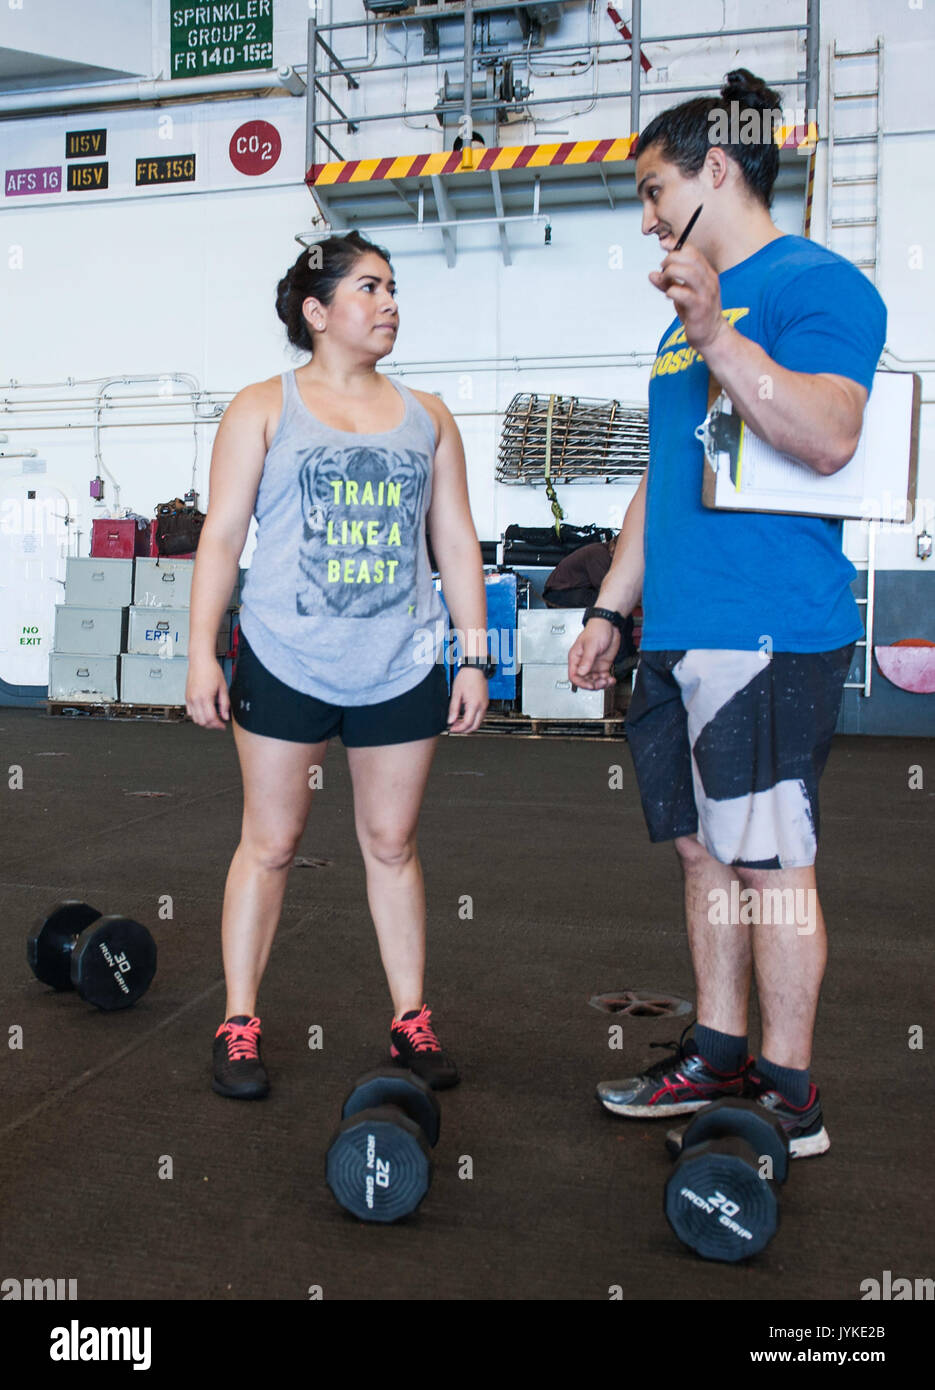 170815-N-RZ514-091 ATLANTIC OCEAN (Aug. 15, 2017) Air Traffic Controller 3rd Class Tania Ramirez, left, receives instruction from 'Fit Boss' Justin Vigil before participating in a 'Battle for the Dumbbell' competition the hangar bay aboard the aircraft carrier USS George H.W. Bush (CVN 77).  The ship and its carrier strike group are conducting naval operations in the U.S. 6th Fleet area of operations in support of U.S. national security interests.  (U.S. Navy photo by Mass Communication Specialist Seaman Jennifer M. Kirkman/Released) Stock Photo